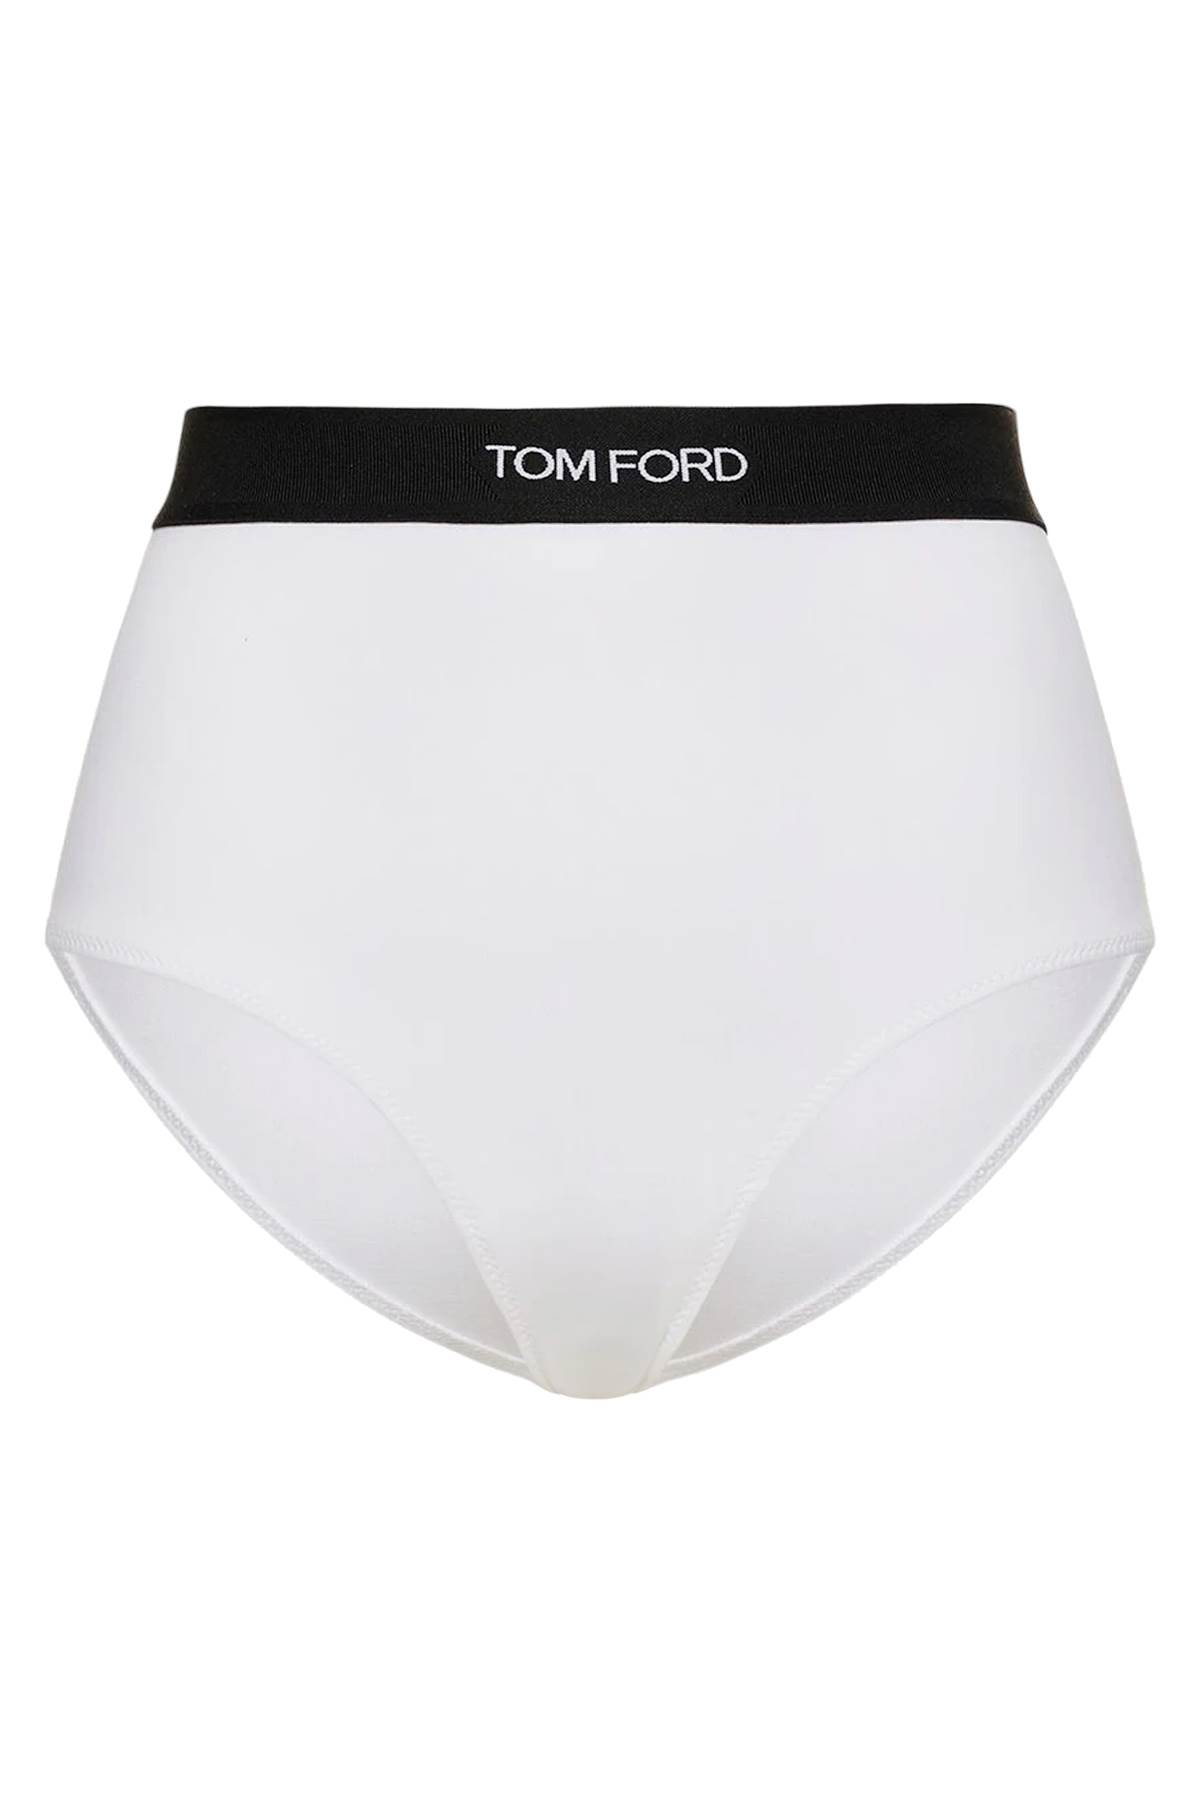 TOM FORD HIGH-WAISTED UNDERWEAR BRIEFS WITH LOGO BAND